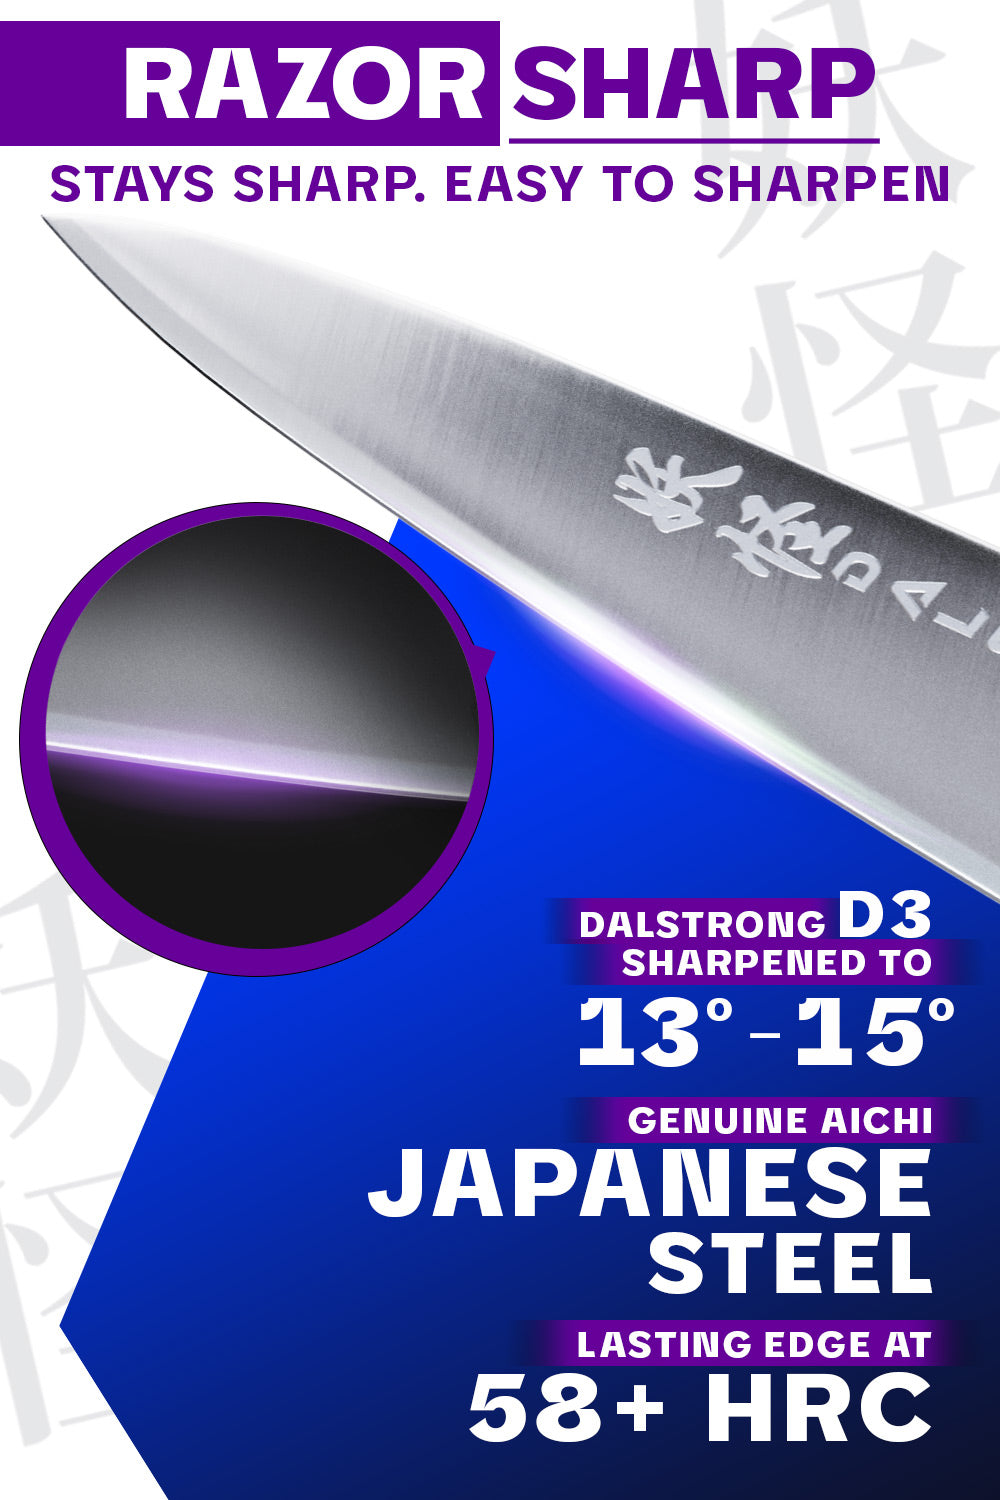 Dalstrong phantom series 8 inch chef knife with olive wood handle featuring it's razor sharp japanese steel blade.